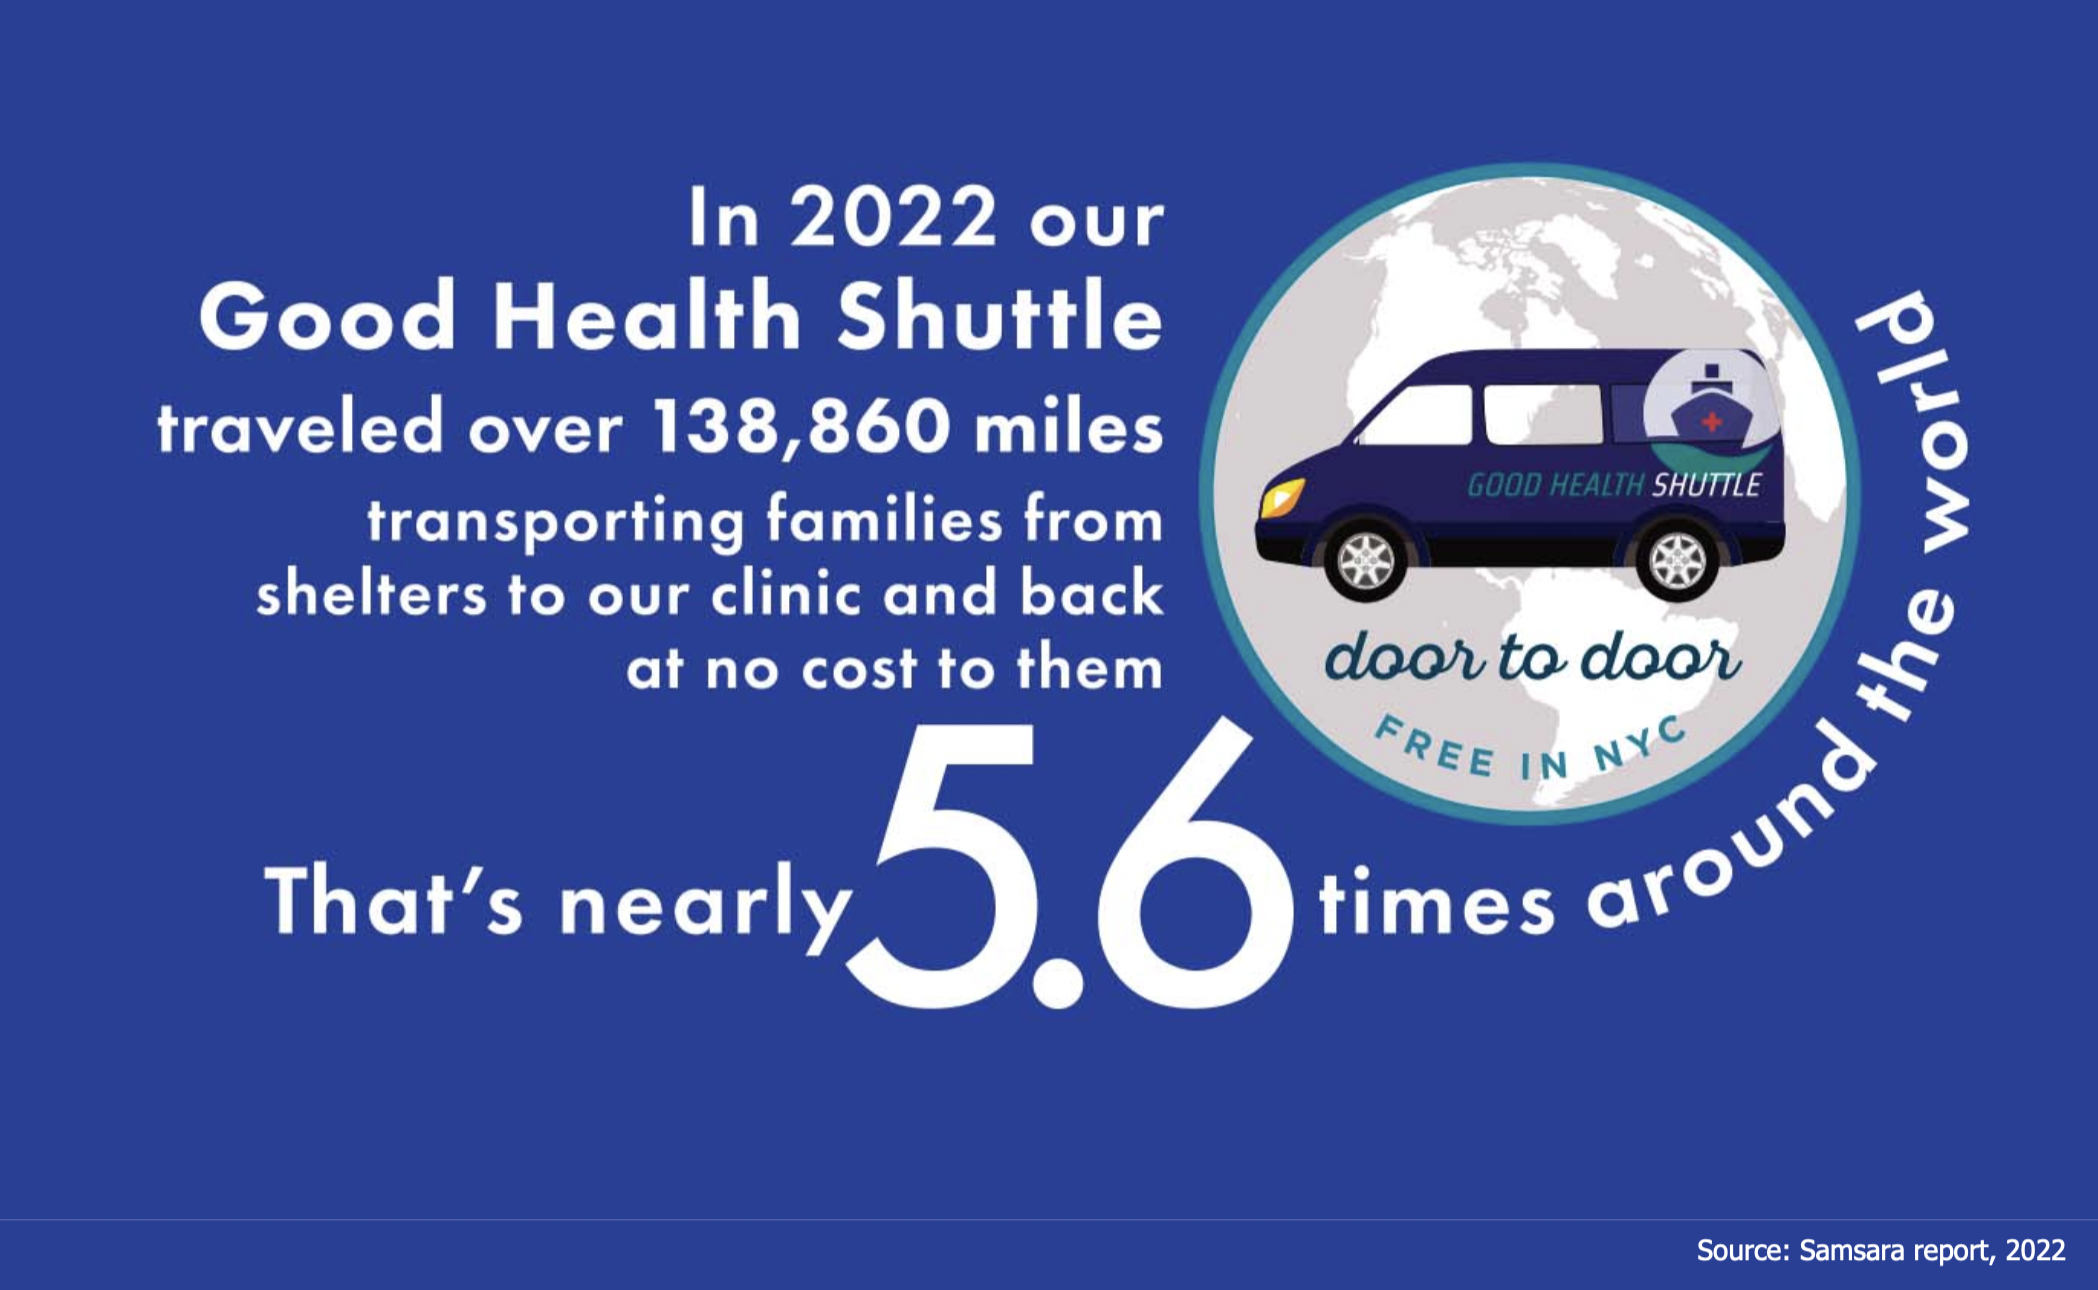 In 2022 our Good Health Shuttle traveled over 138,860 miles transporting families from shelters to our clinic and back at no cost to them. That's nearly 5.6 times around the world.